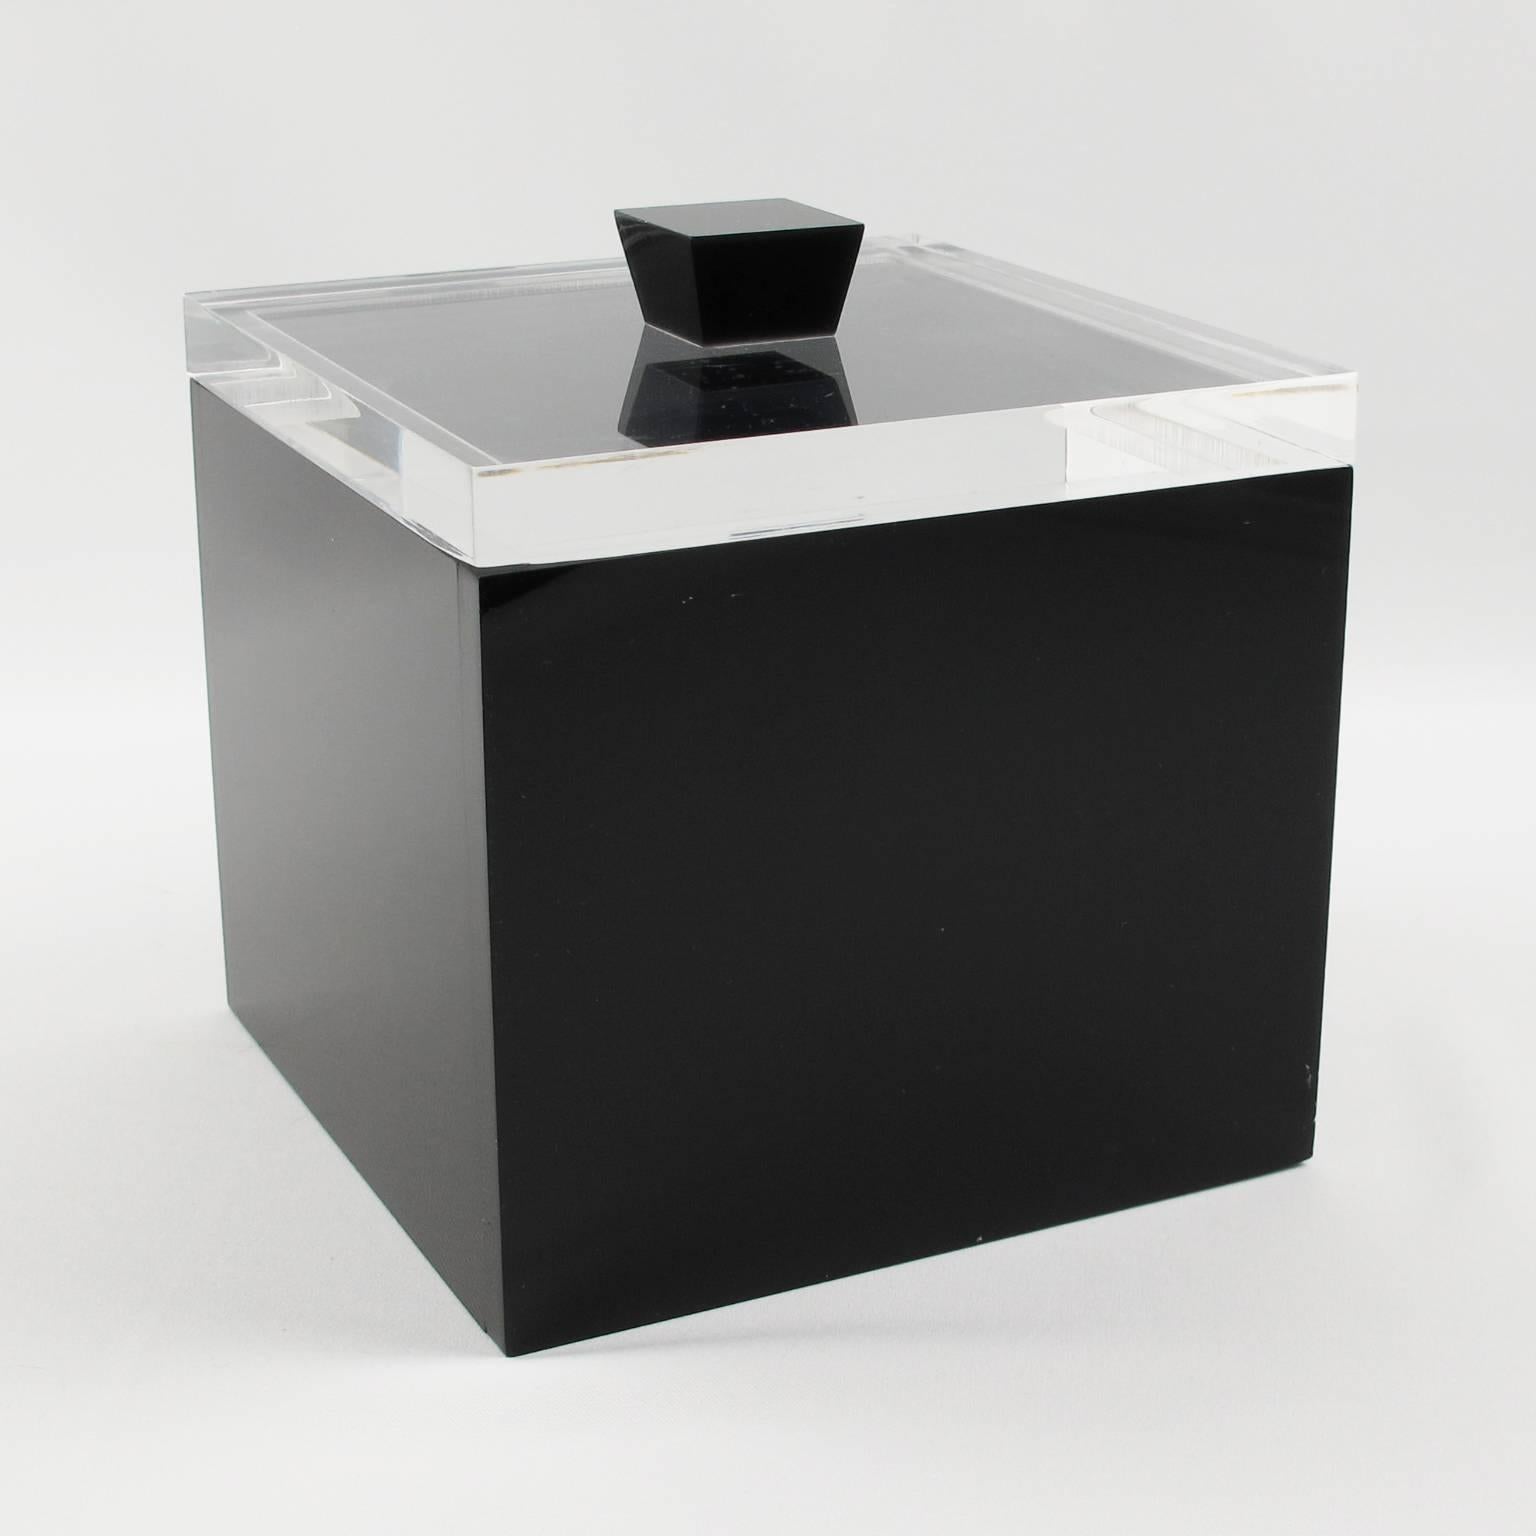 Modernist Lucite ice bucket by Italian designer Alessandro Albrizzi. Vintage, Mid-Century Modern 1970s Lucite geometric ice bucket in crystal clear and black color. Tall square shape with lid.

Measurements: 6.88 in. wide (17.5 cm) x 6.88 in. deep